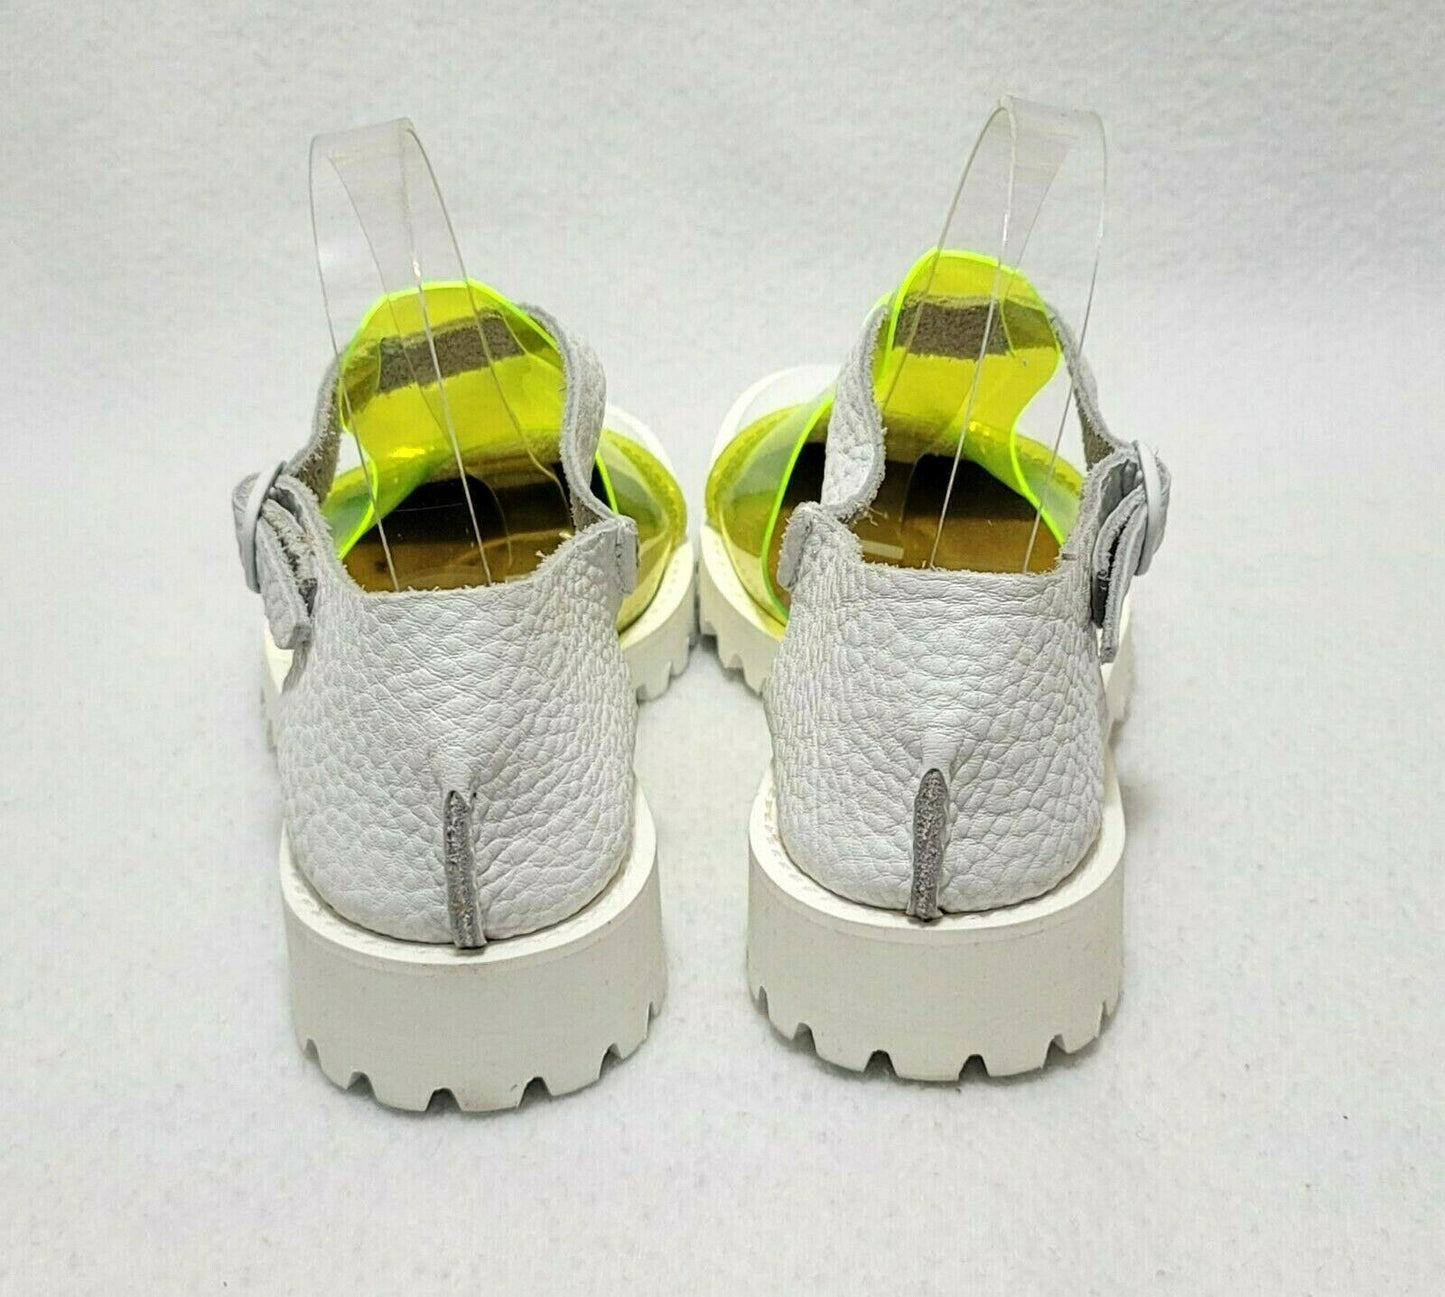 U-DOT Leather Sandals Lug Sole White Yellow Sandals Womens Size US 7 Japan - SVNYFancy